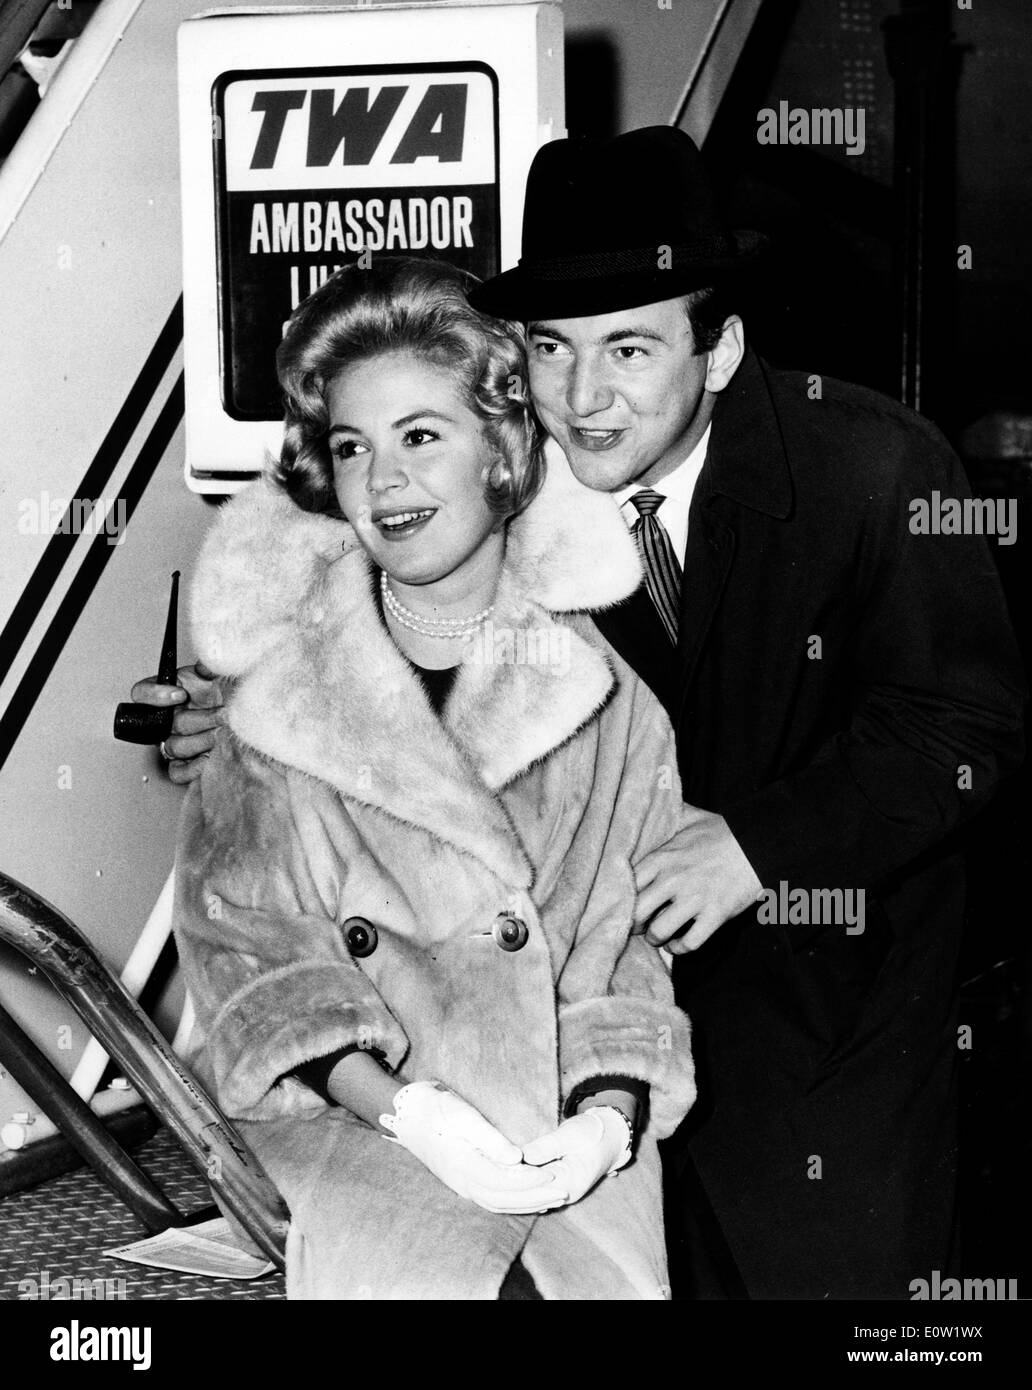 Dec. 01, 1960 - Hollywood, California, U.S. - Newlyweds BOBBY DARIN and SANDRA DEE are aglow on their arrival here last night via TWA Superjet from LA following a brief Honeymoon. Actress Sandra Dee, the blond beauty who attracted a large teen audience in the 1960s with films such as 'Gidget' and 'Tammy and the Doctor' and had a headlined marriage to pop singer Bobby Darin, died February 20, 2005 in Los Angeles. She was 62. Stock Photo